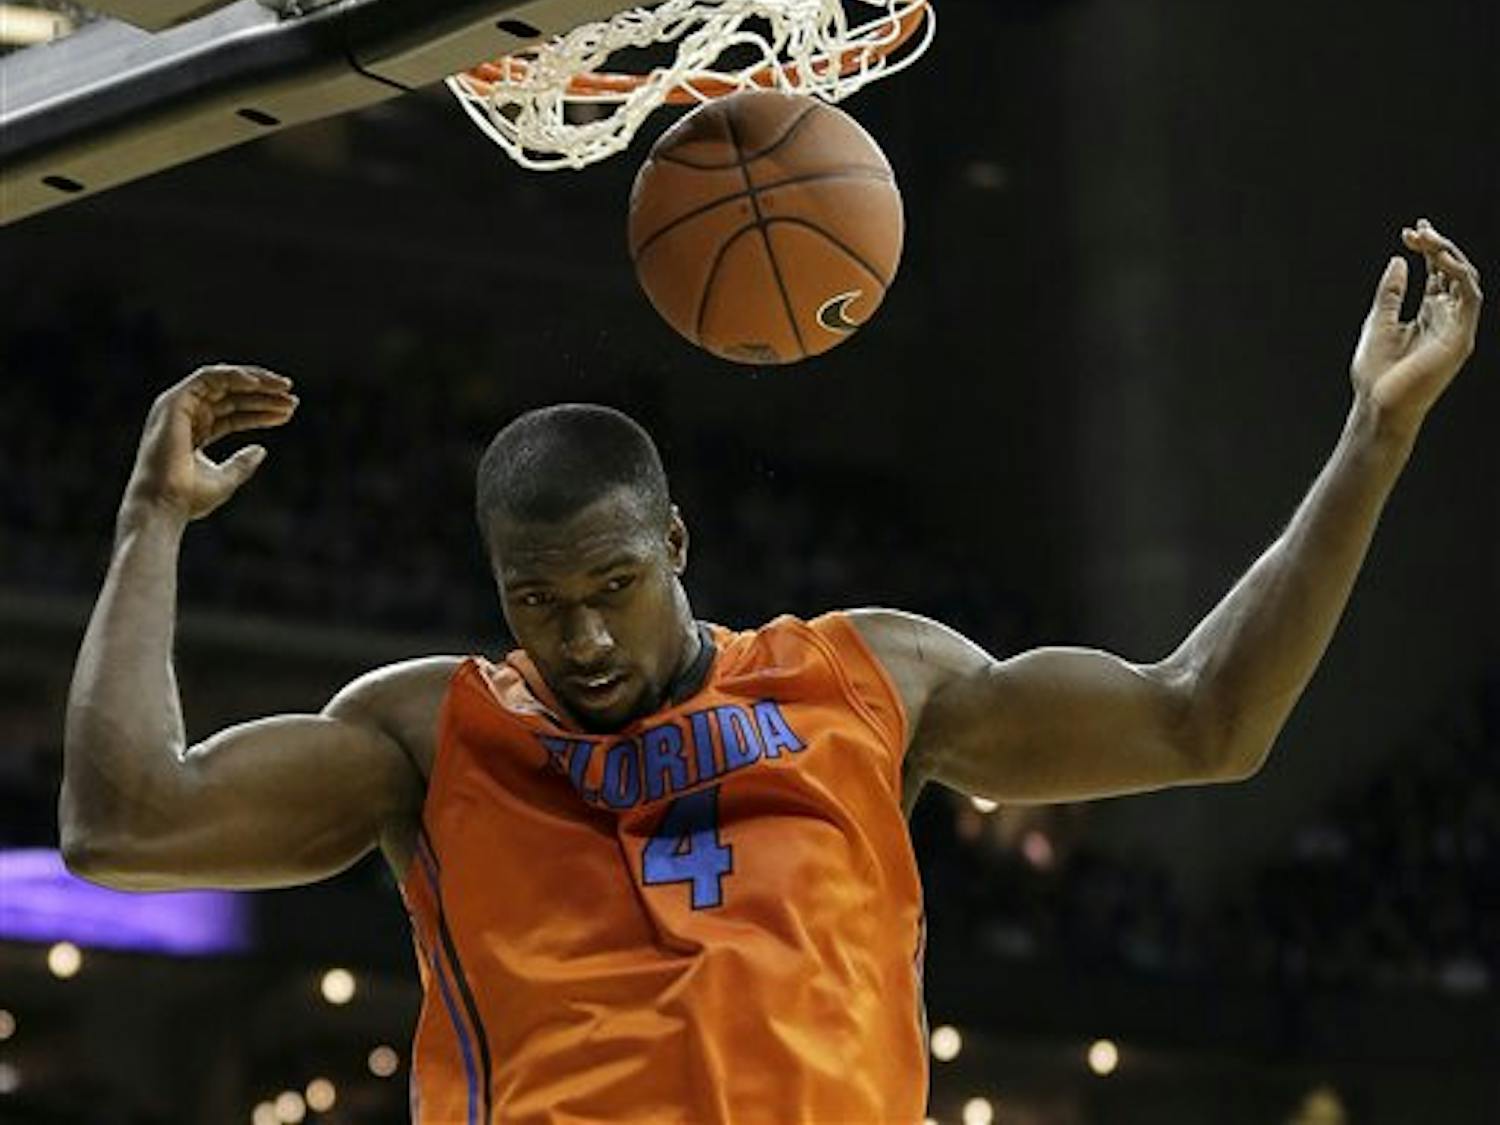 Florida center Patric Young (4) dunks the ball during the second half against Kansas State on Saturday at the Sprint Center in Kansas City, Mo. Kansas State won the game 67-61.&nbsp;